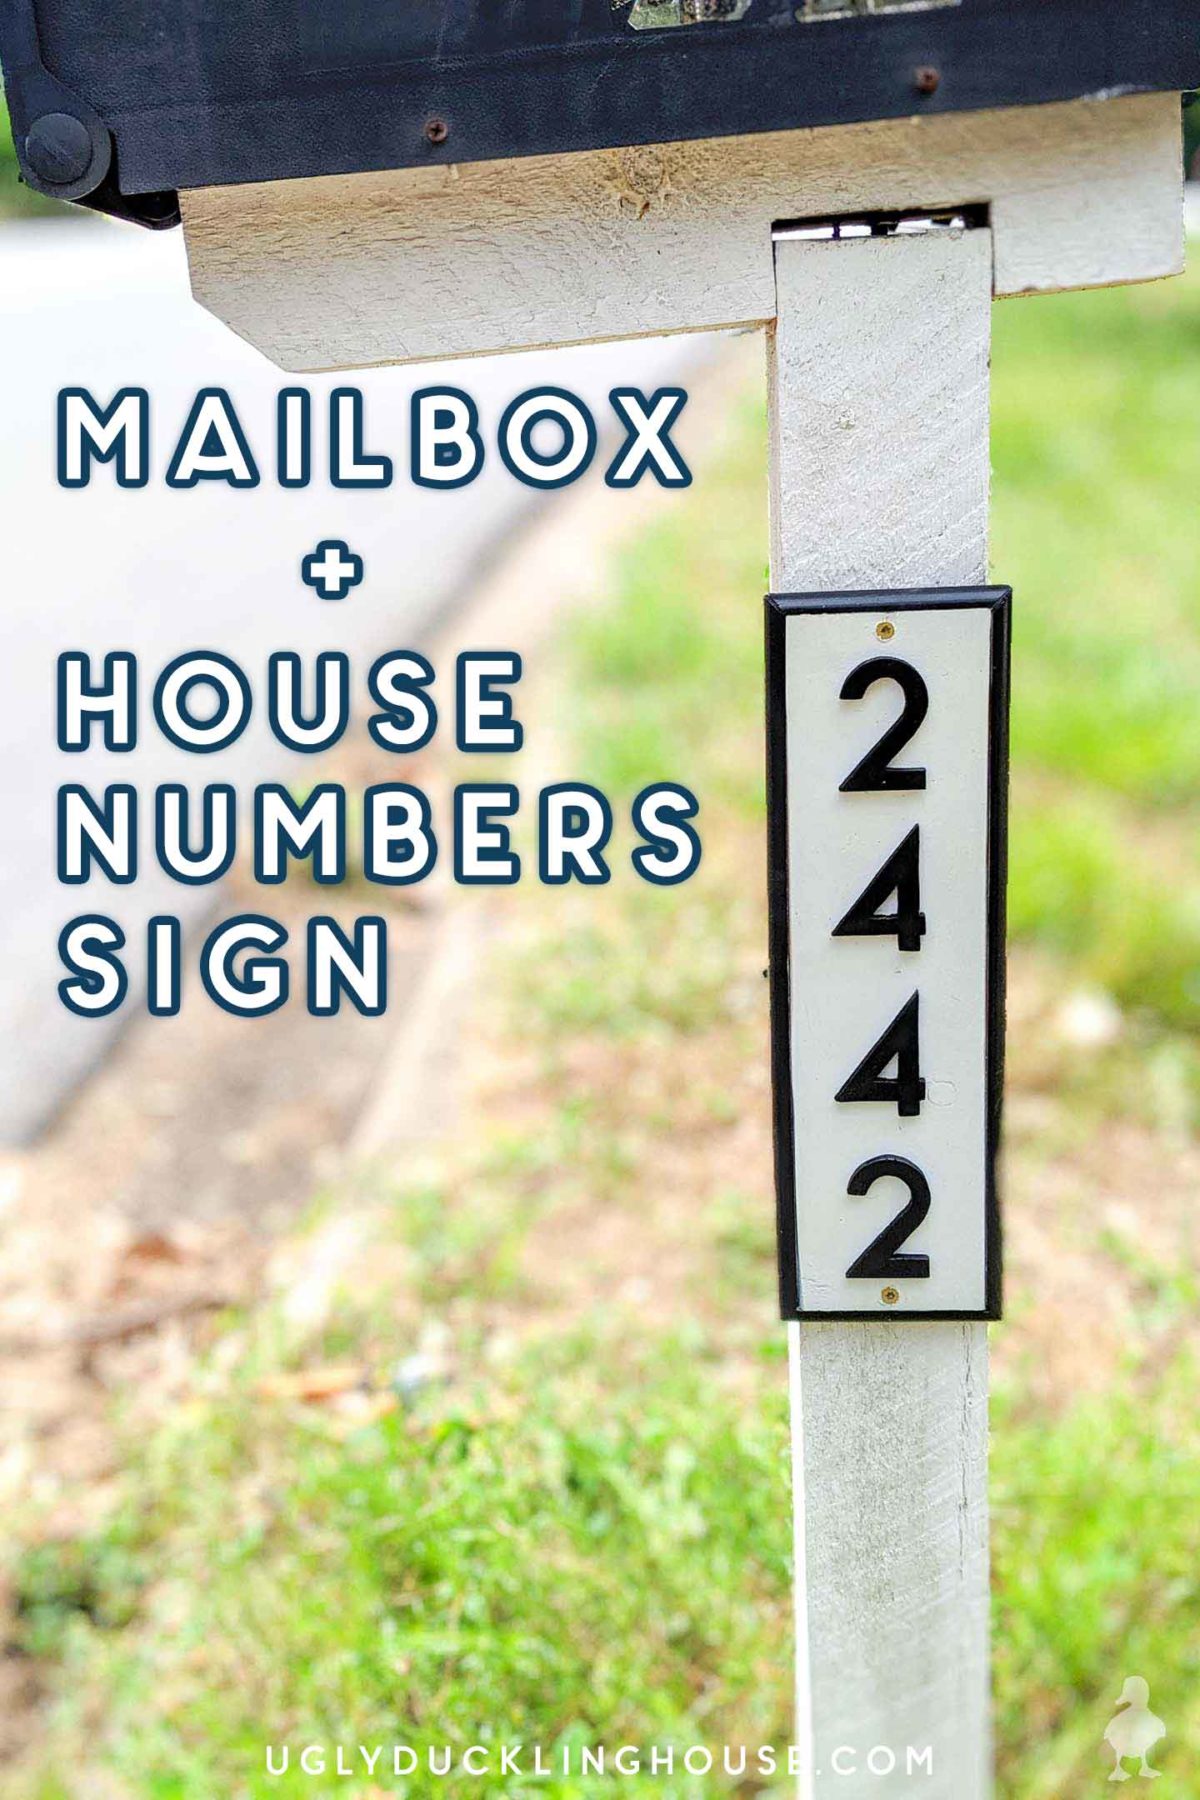 House numbers on a sign, mounted to a mailbox. The words "Mailbox + House Numbers Sign" on the left